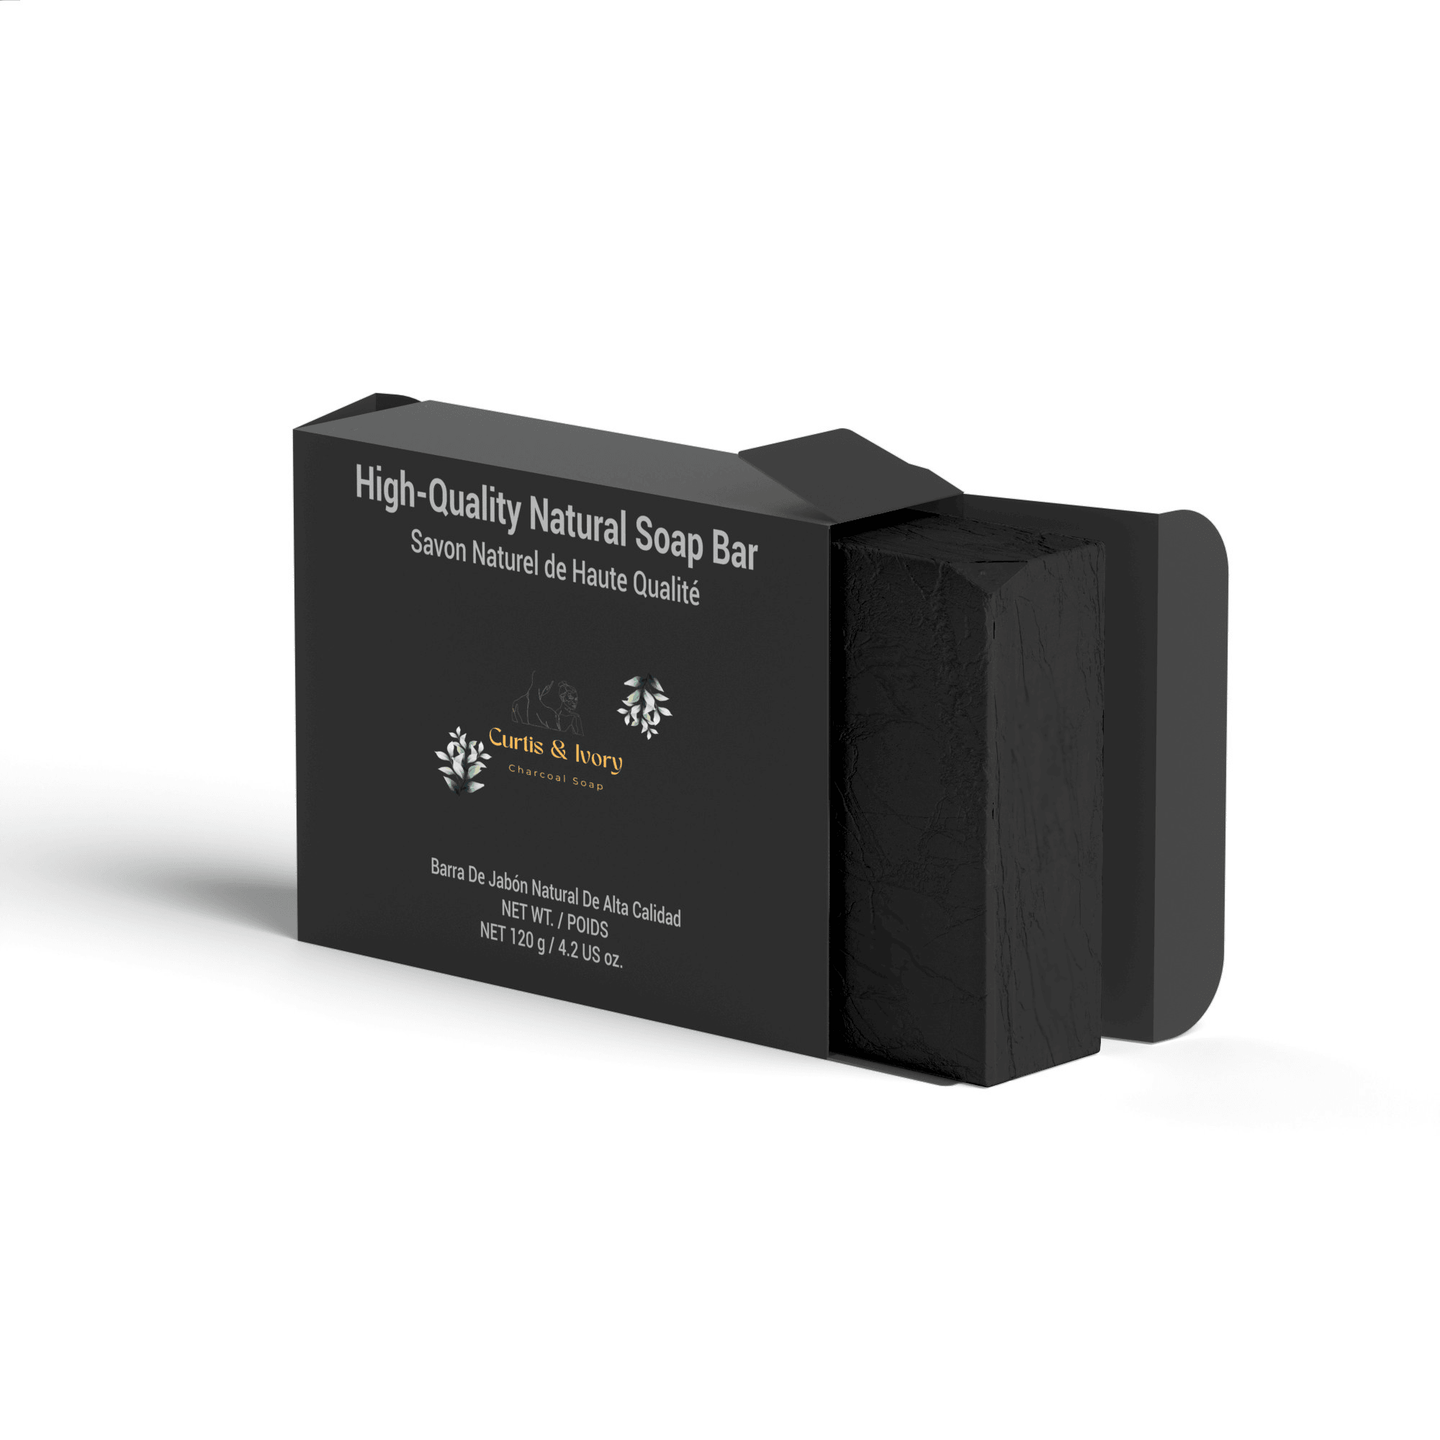 Curtis & Ivory Organic Charcoal Soap fused with active charcoal - Curtis & Ivory